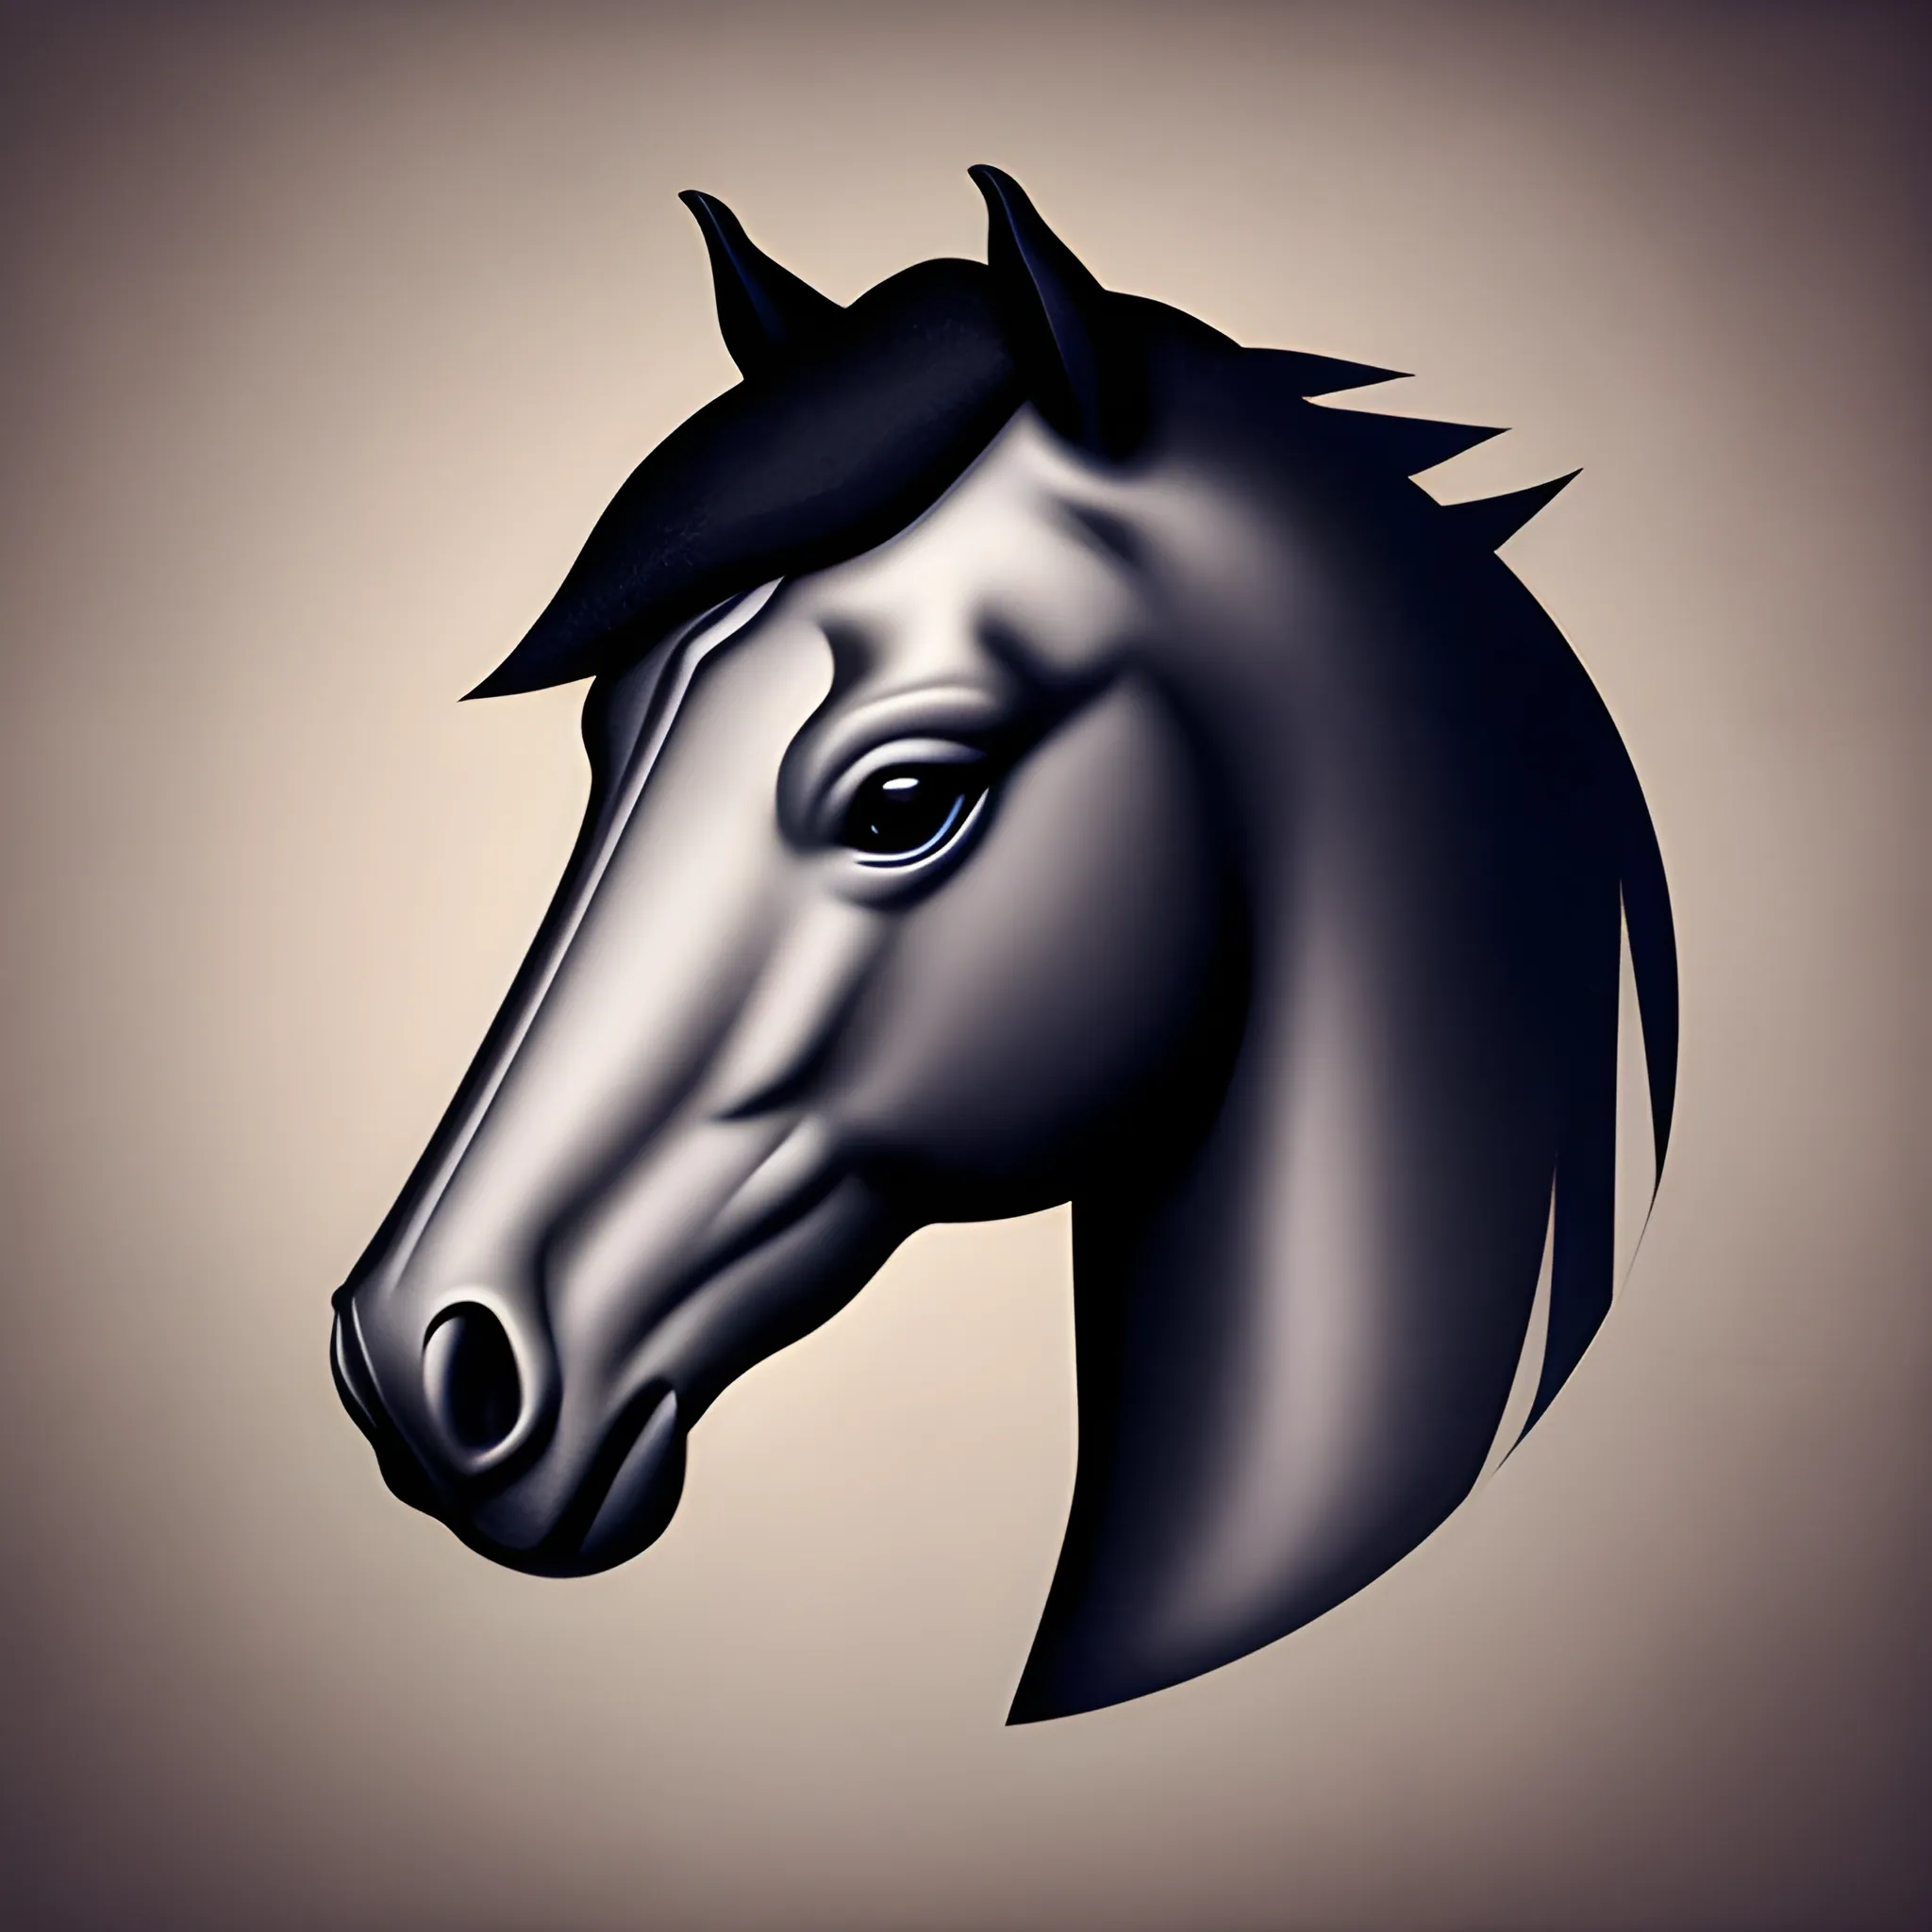 Horse logo, no text, side view